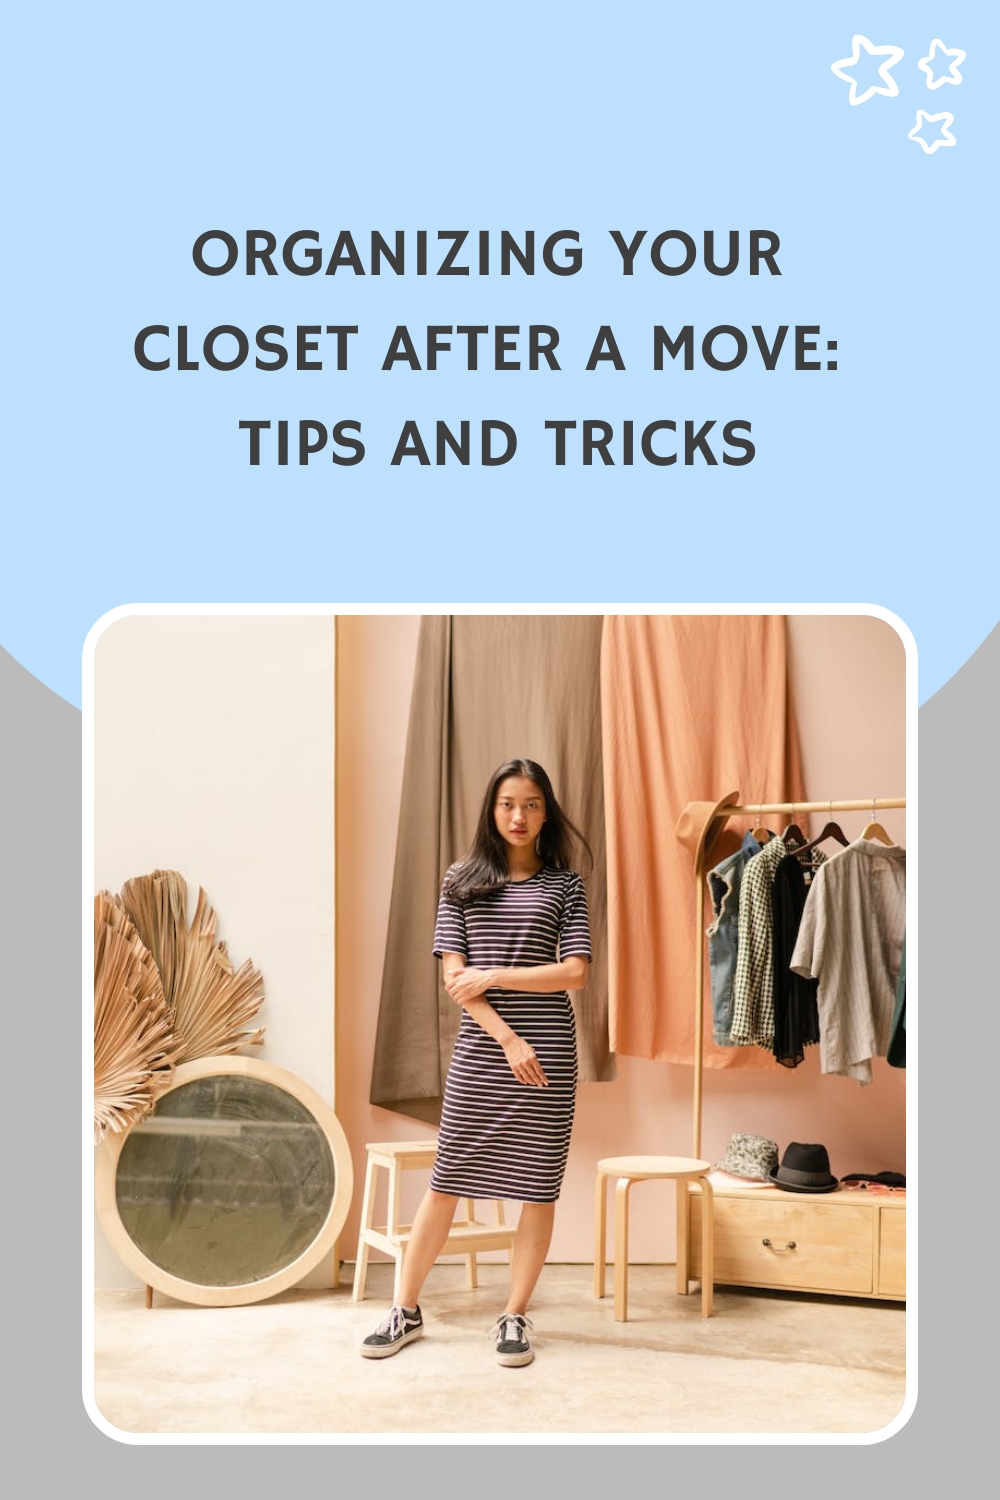 Organizing Your Closet After a Move: Tips and Tricks